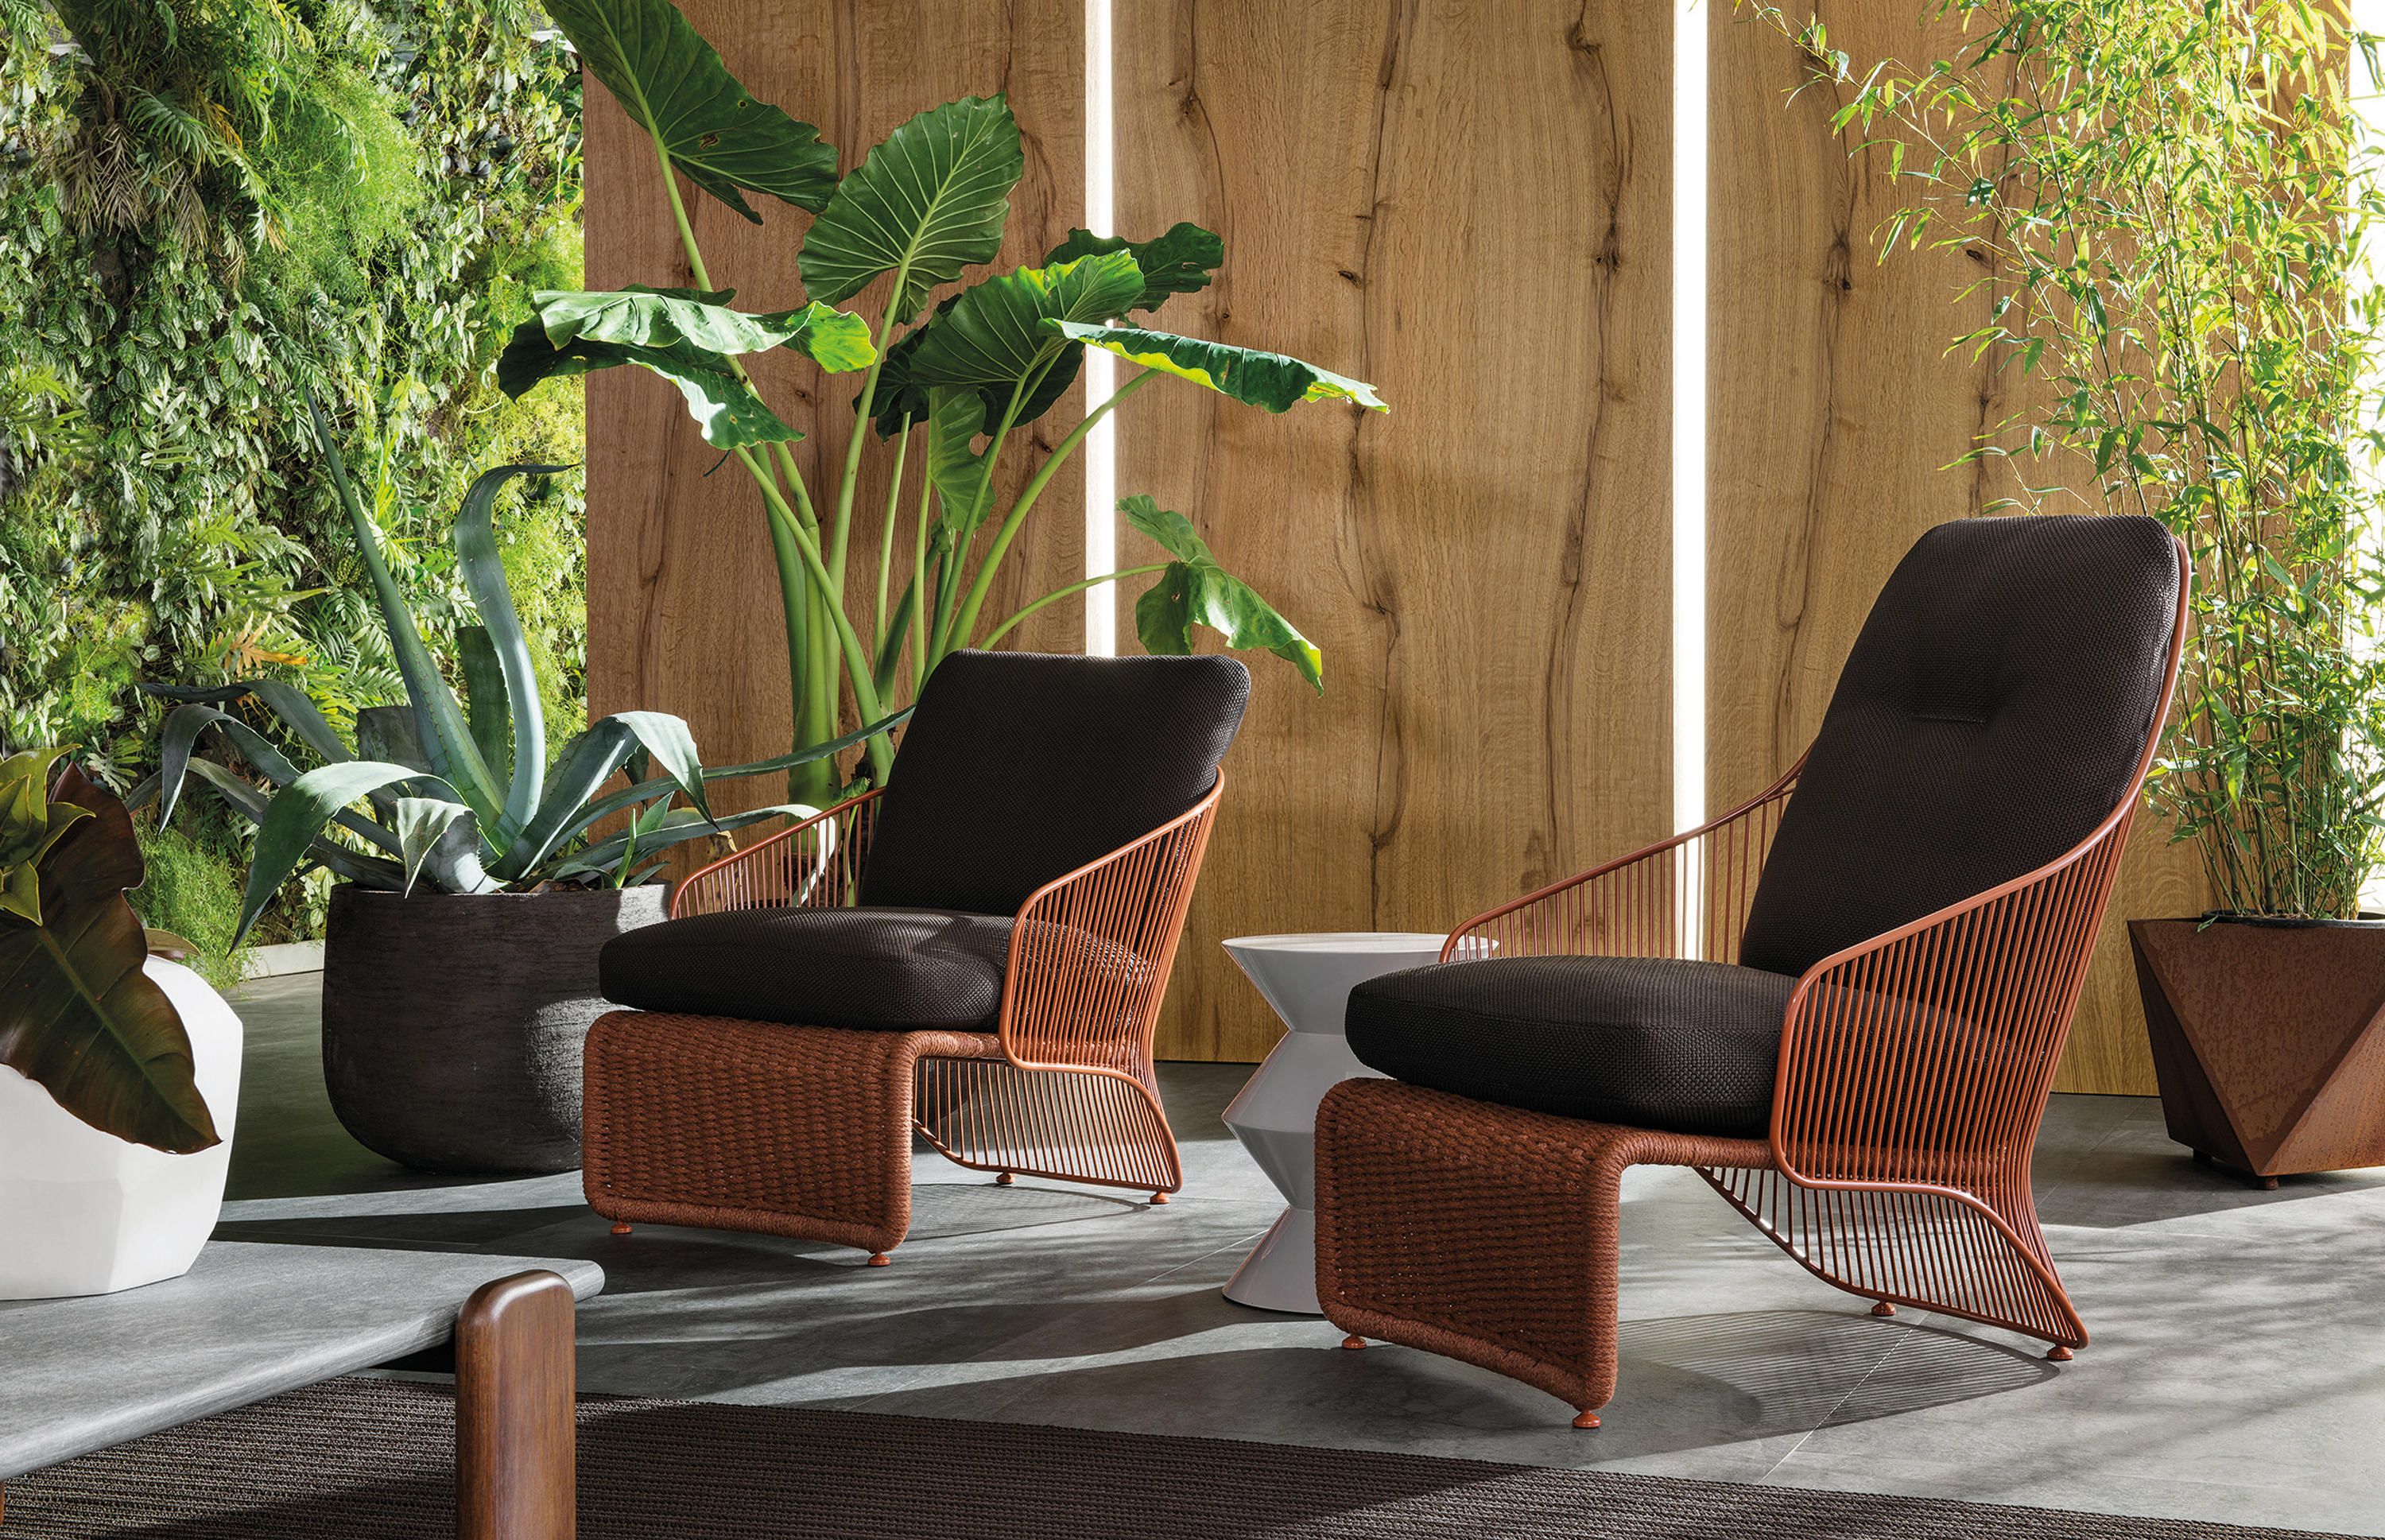 Outdoor chair COLETTE by Minotti